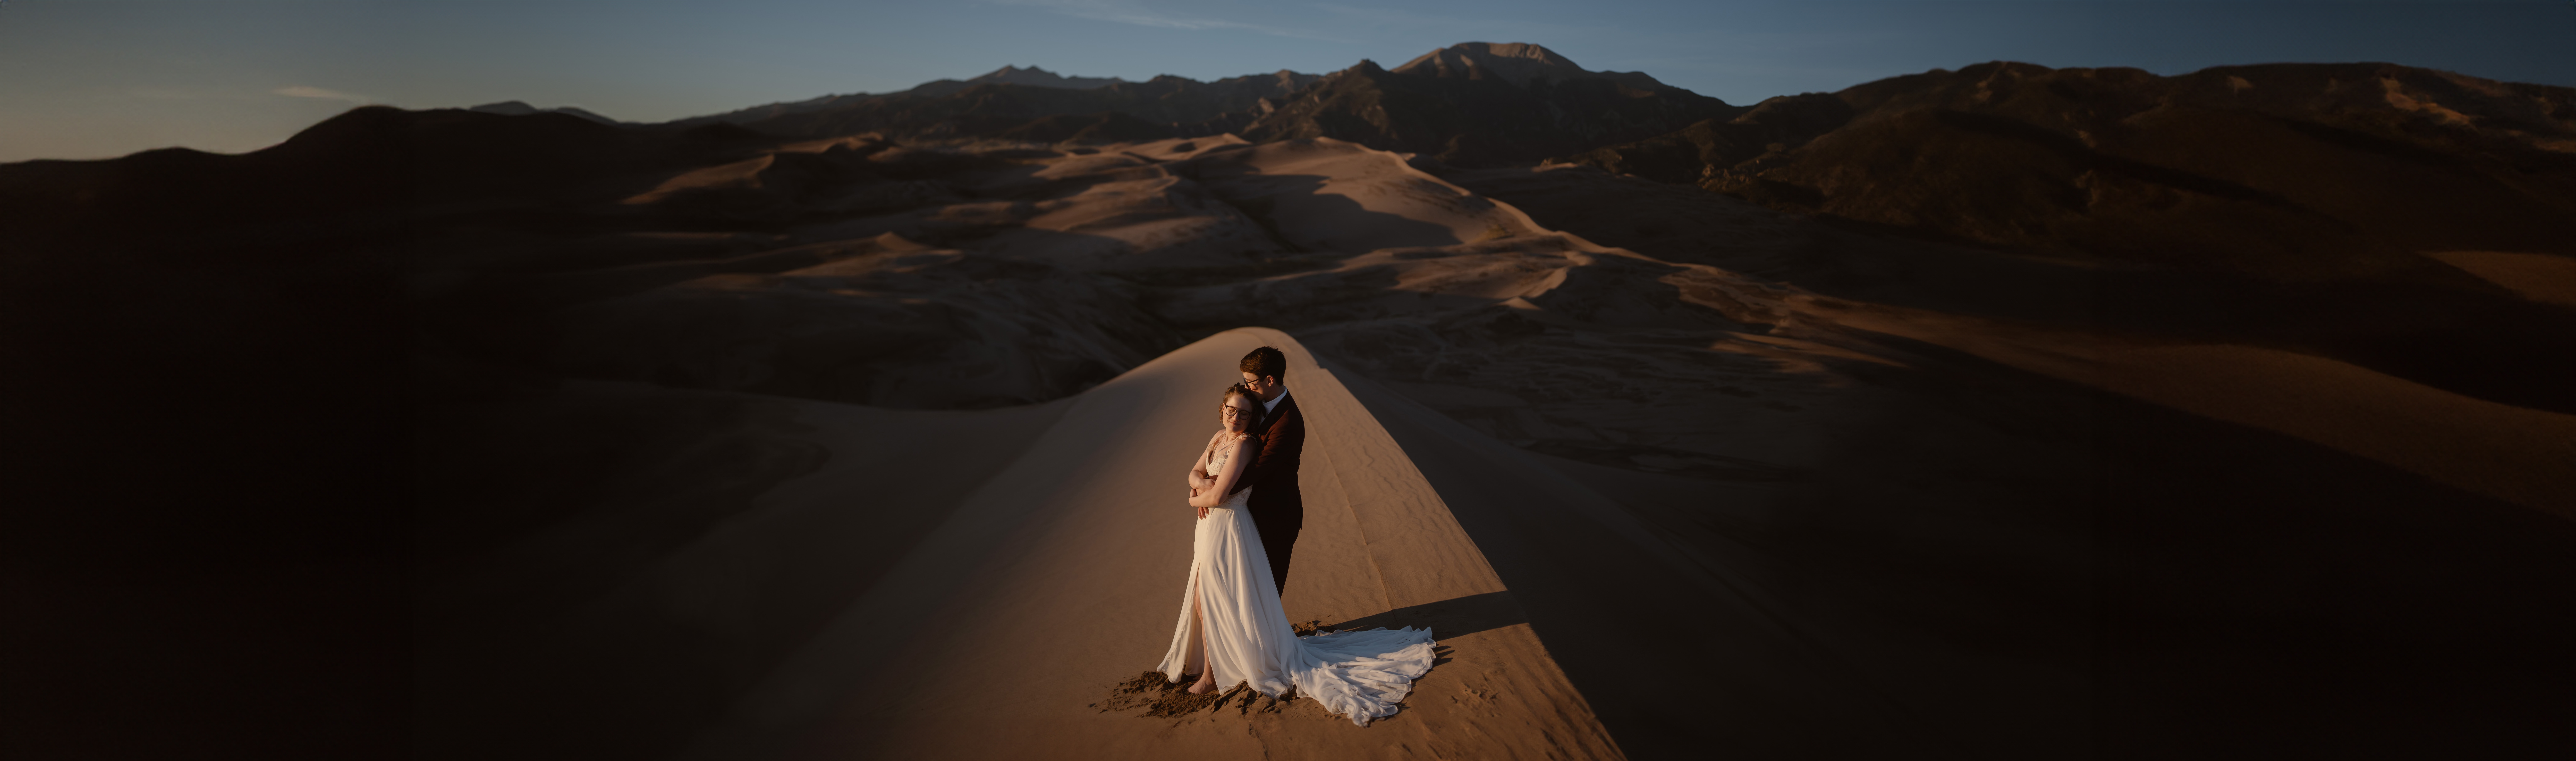 How to Become an Elopement Photographer